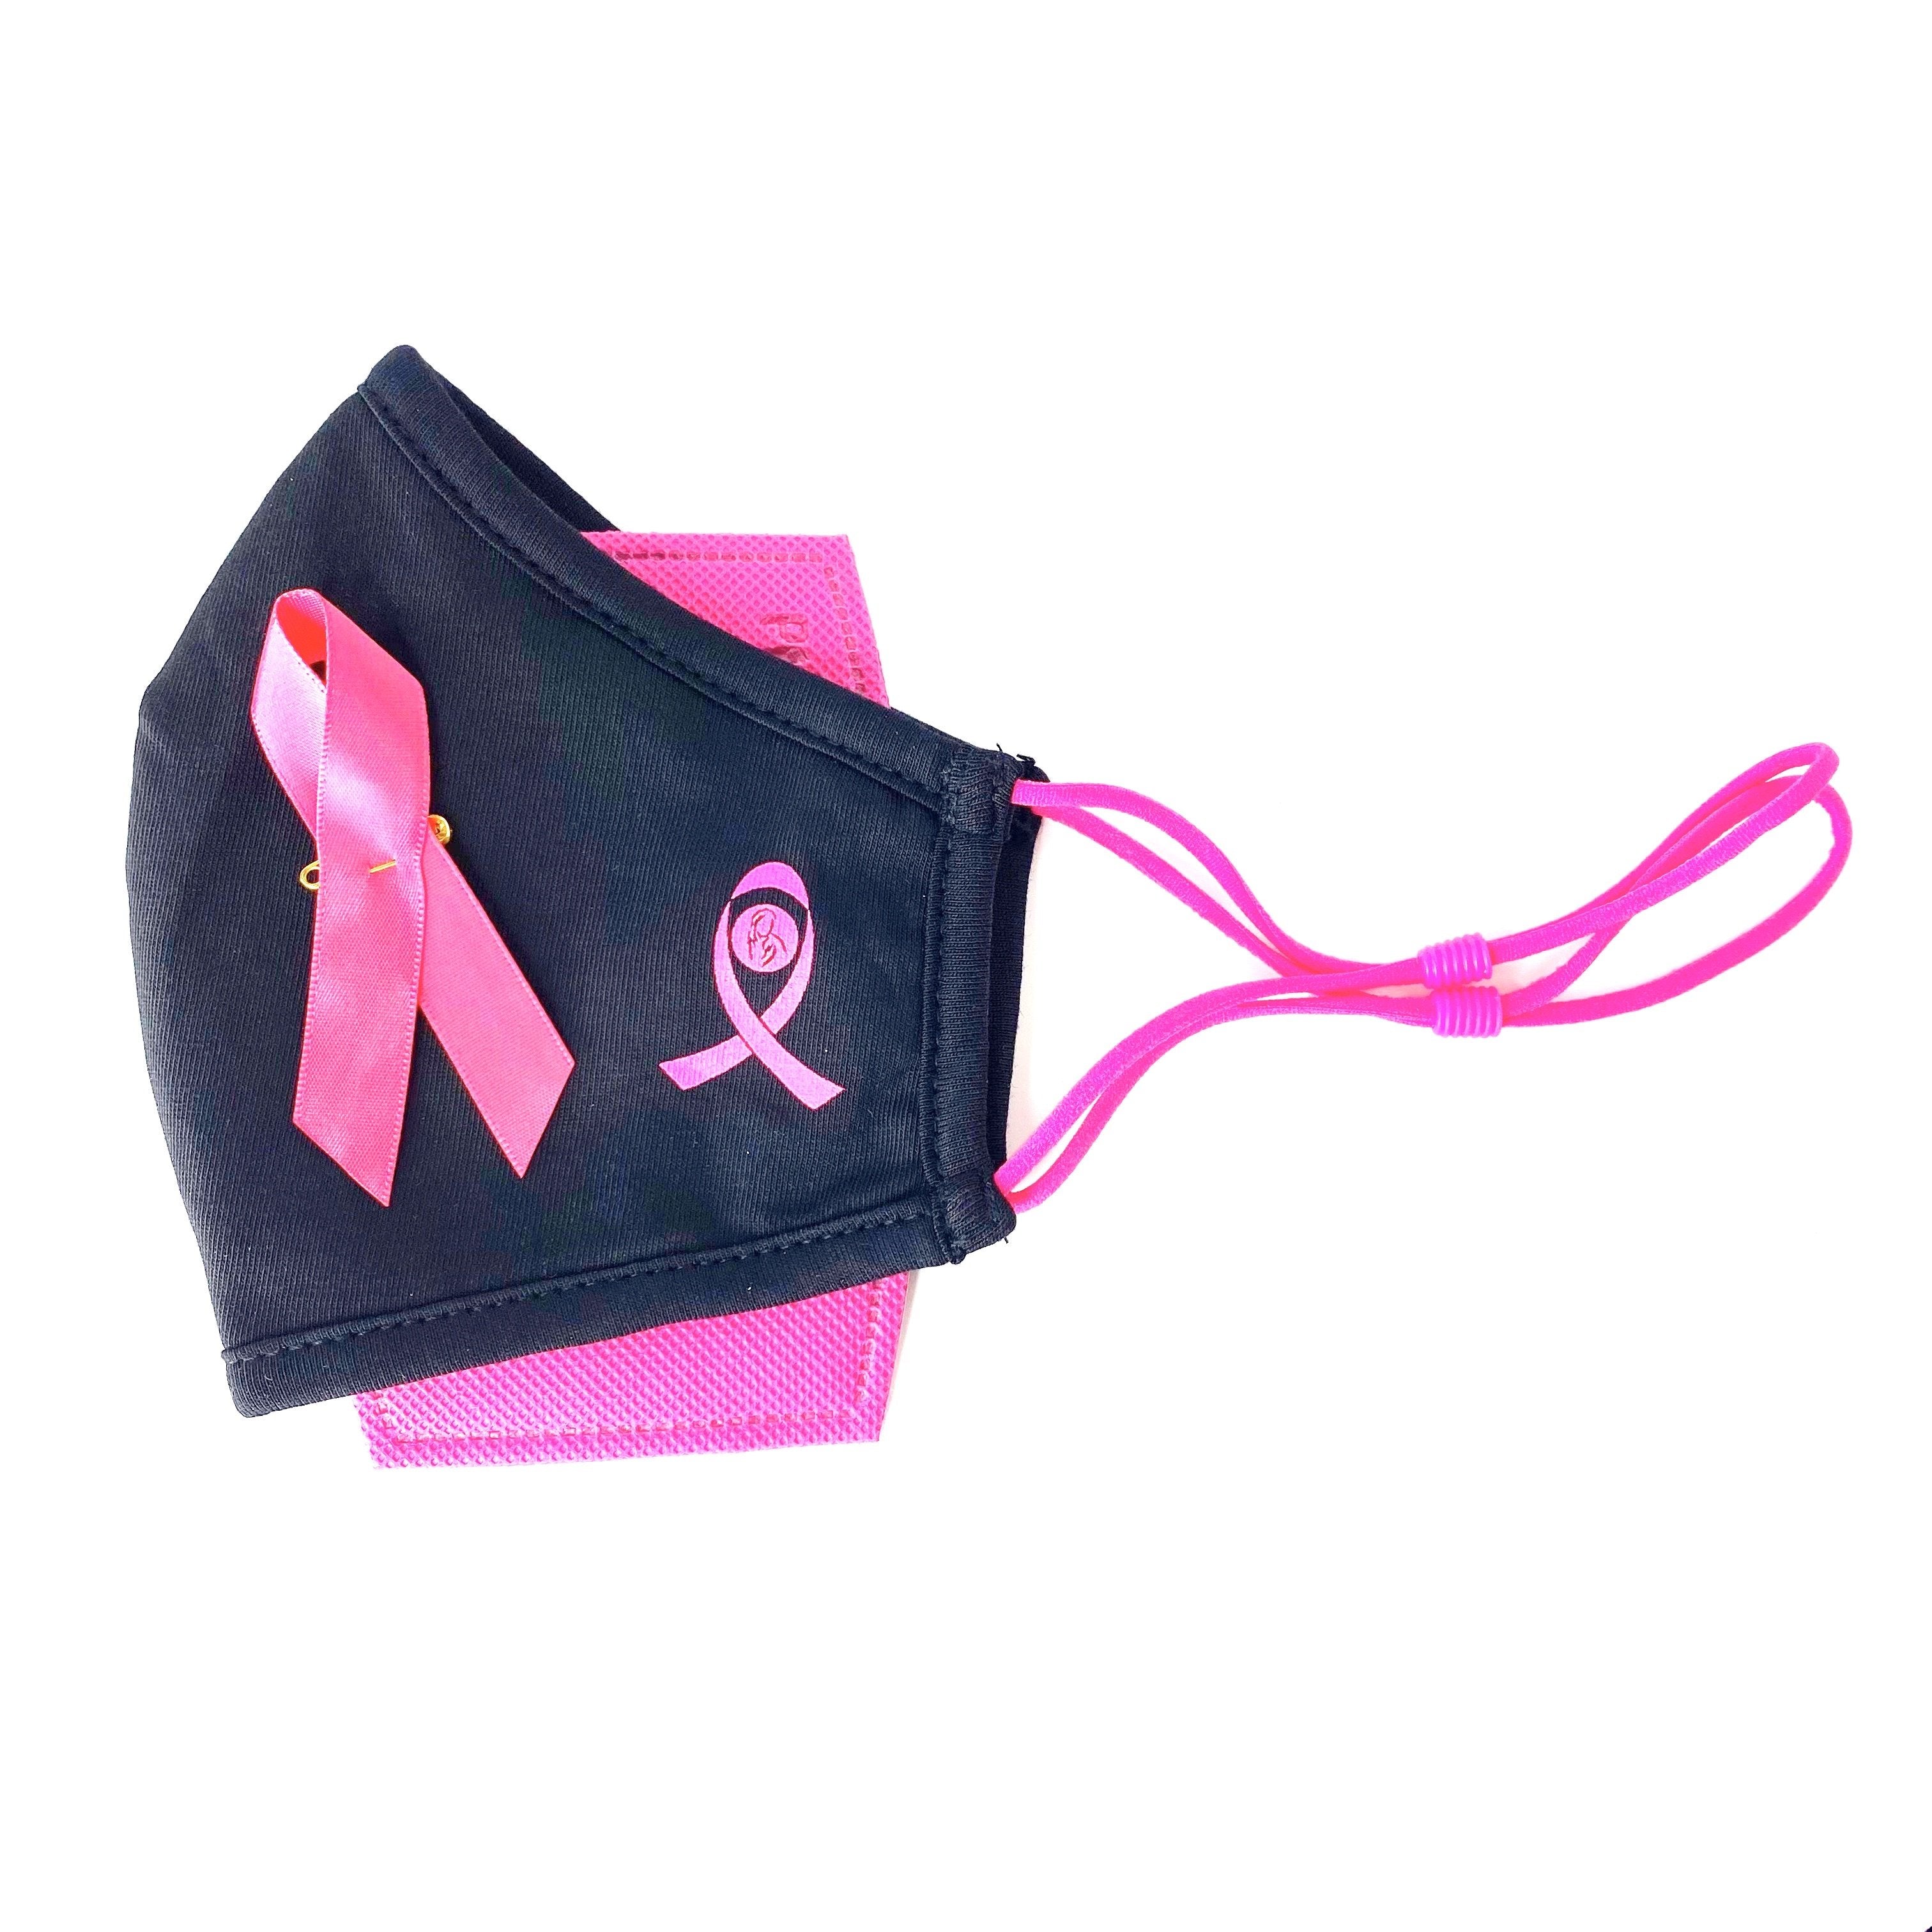 250 Pack Breast Cancer Awareness Pink Ribbons with Pins